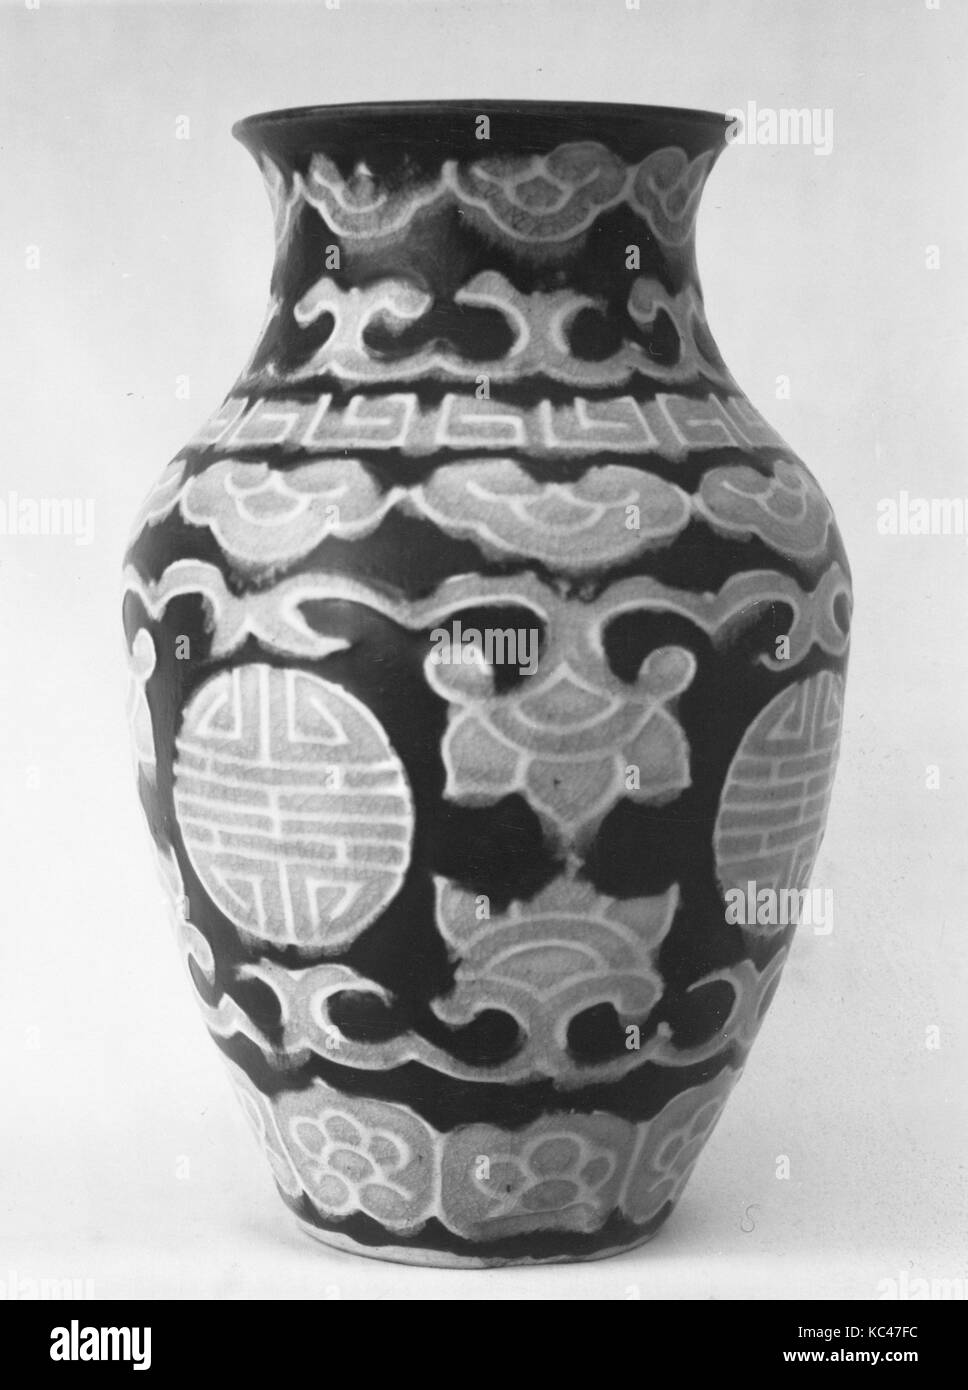 Vase, 19th century, Japan, Clay covered with polychrome glazes on ornaments outlined in relief (Kairakuen ware), H. 6 7/8 in Stock Photo